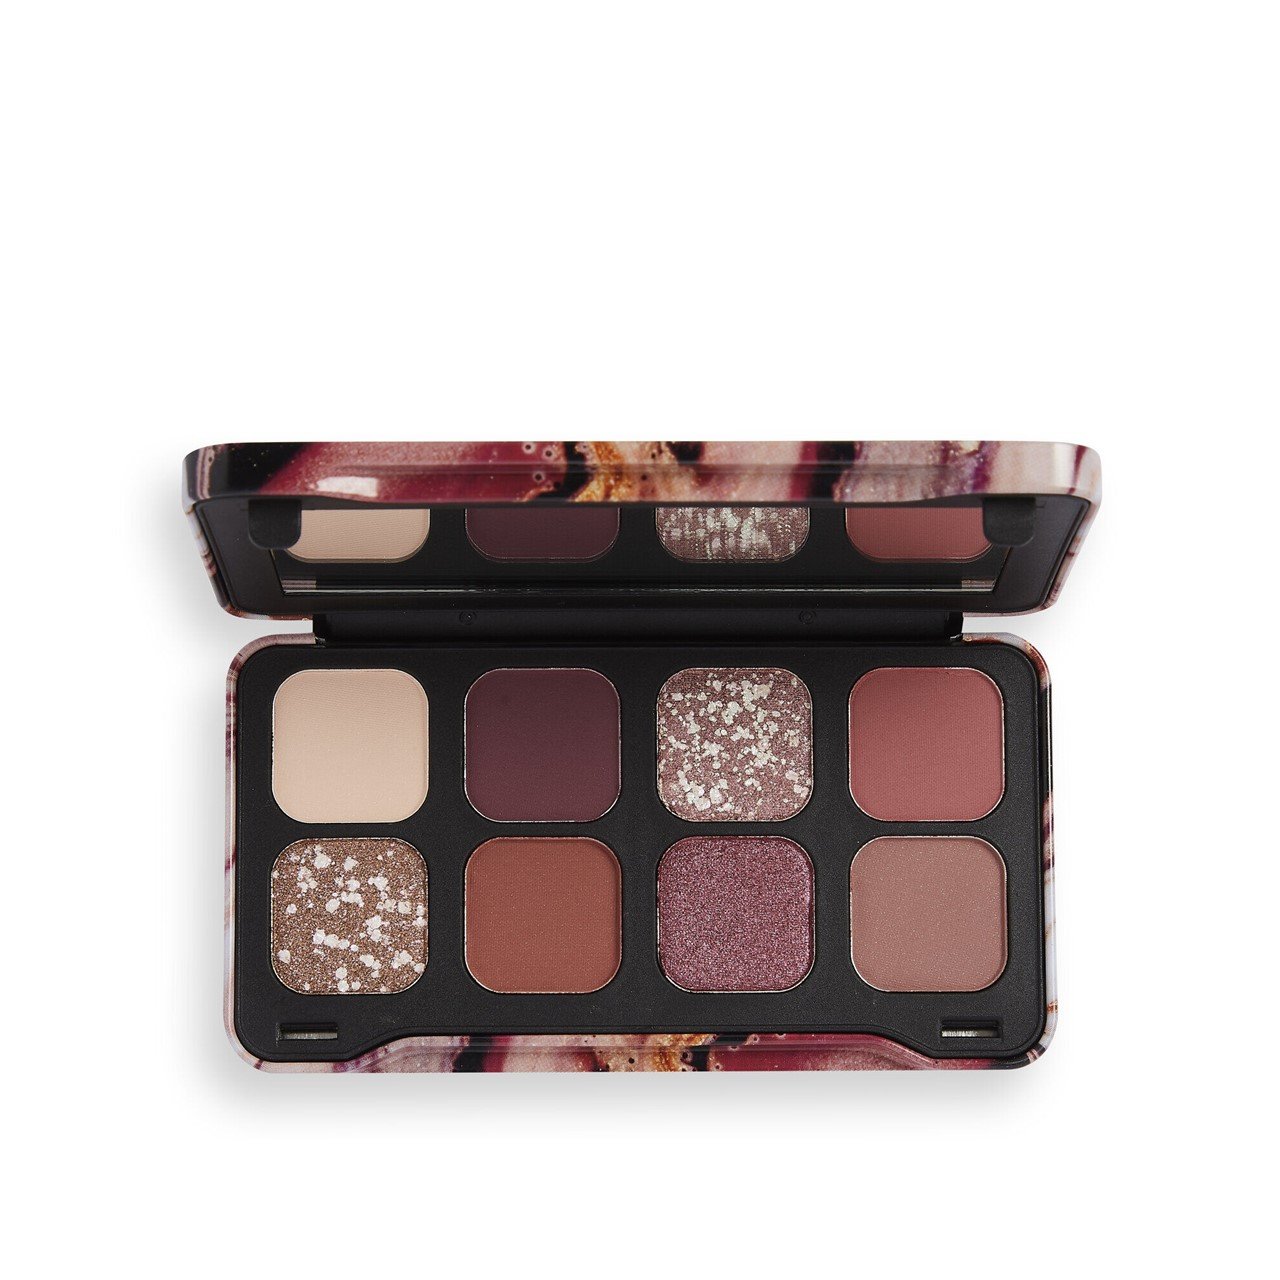 https://static.beautytocare.com/cdn-cgi/image/width=1600,height=1600,f=auto/media/catalog/product//m/a/makeup-revolution-forever-flawless-dynamic-allure-eyeshadow-palette-8g.jpg